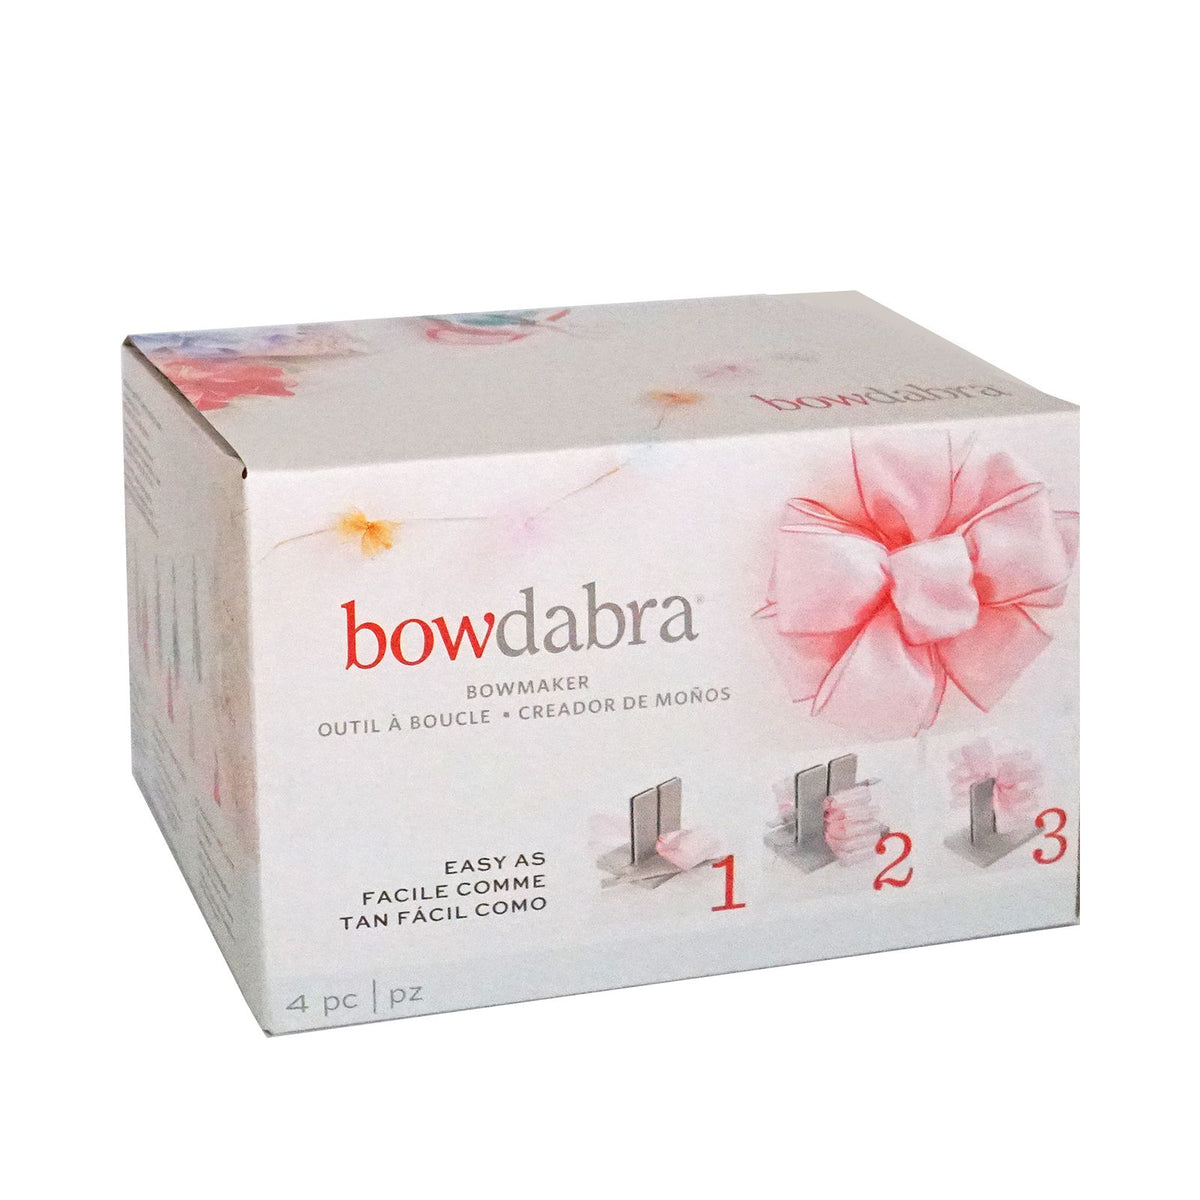 About Bowdabra  Bowdabra Bow Making Tools, Bow Ribbons, Bow Wires